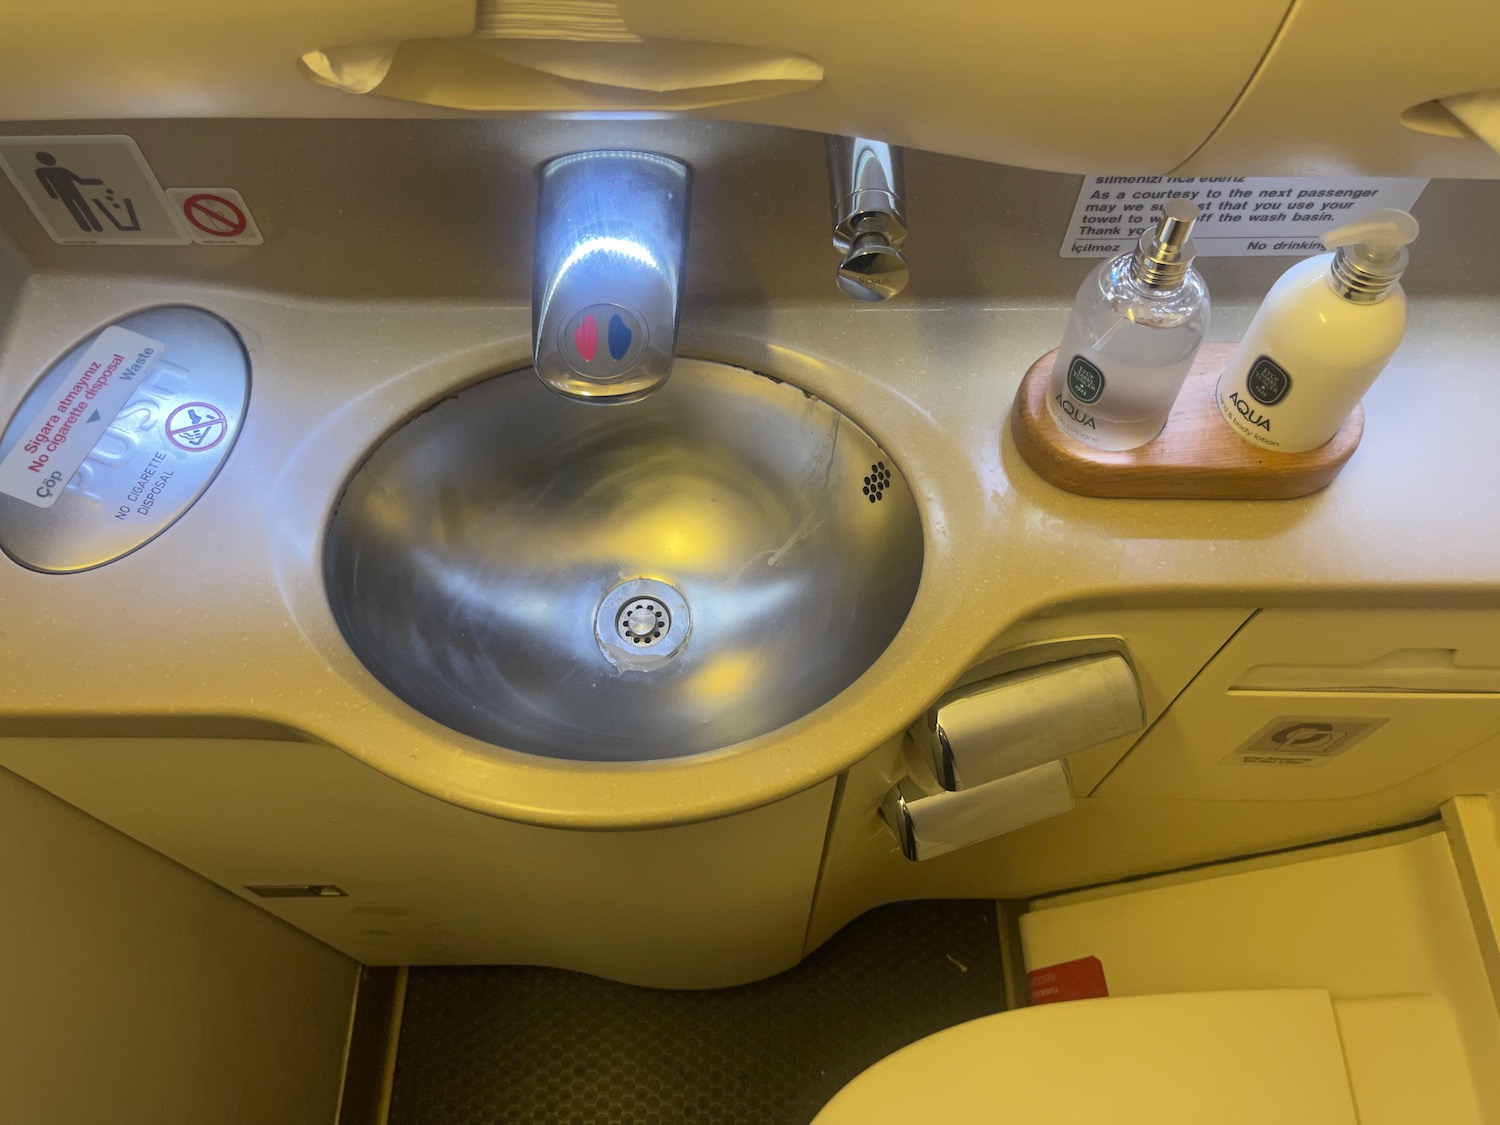 a sink and soaps on a plane